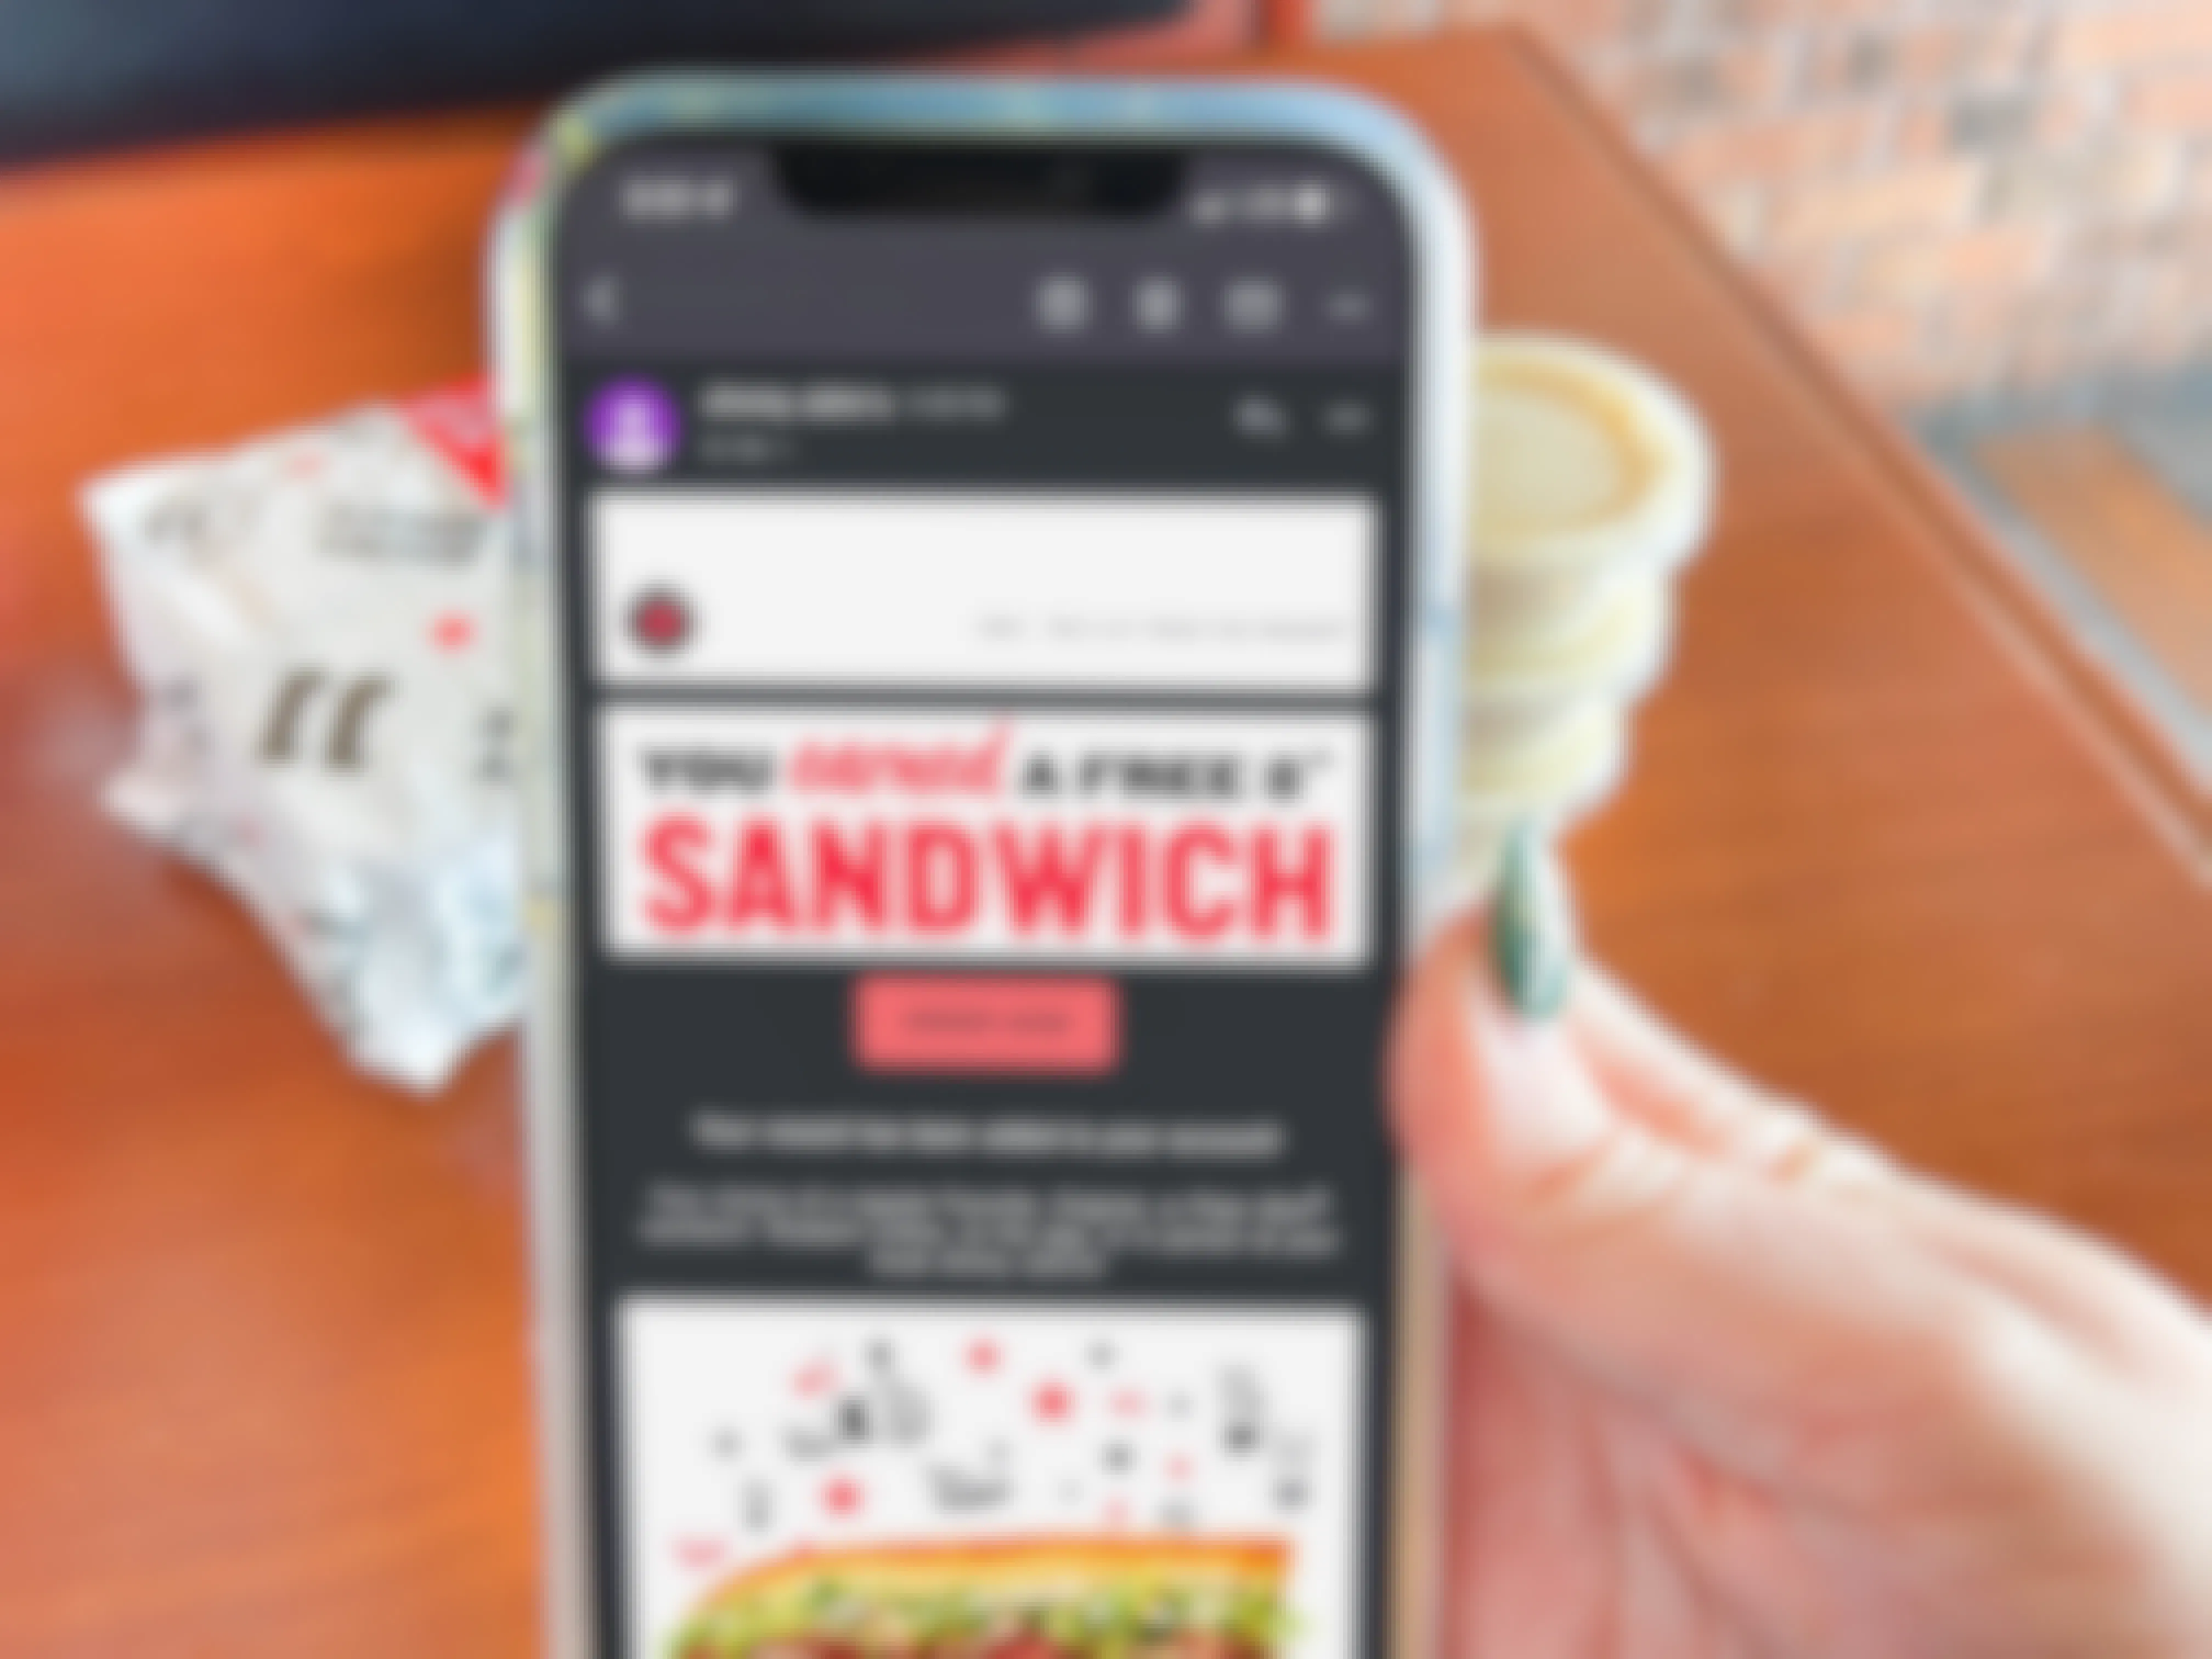 A person's hand holding an iPhone displaying an email from Jimmy John's stating the user has earned a free 8" sandwich. A Jimmy John's sandwich wrapped in paper and extra sauces can be seen on the table behind it.